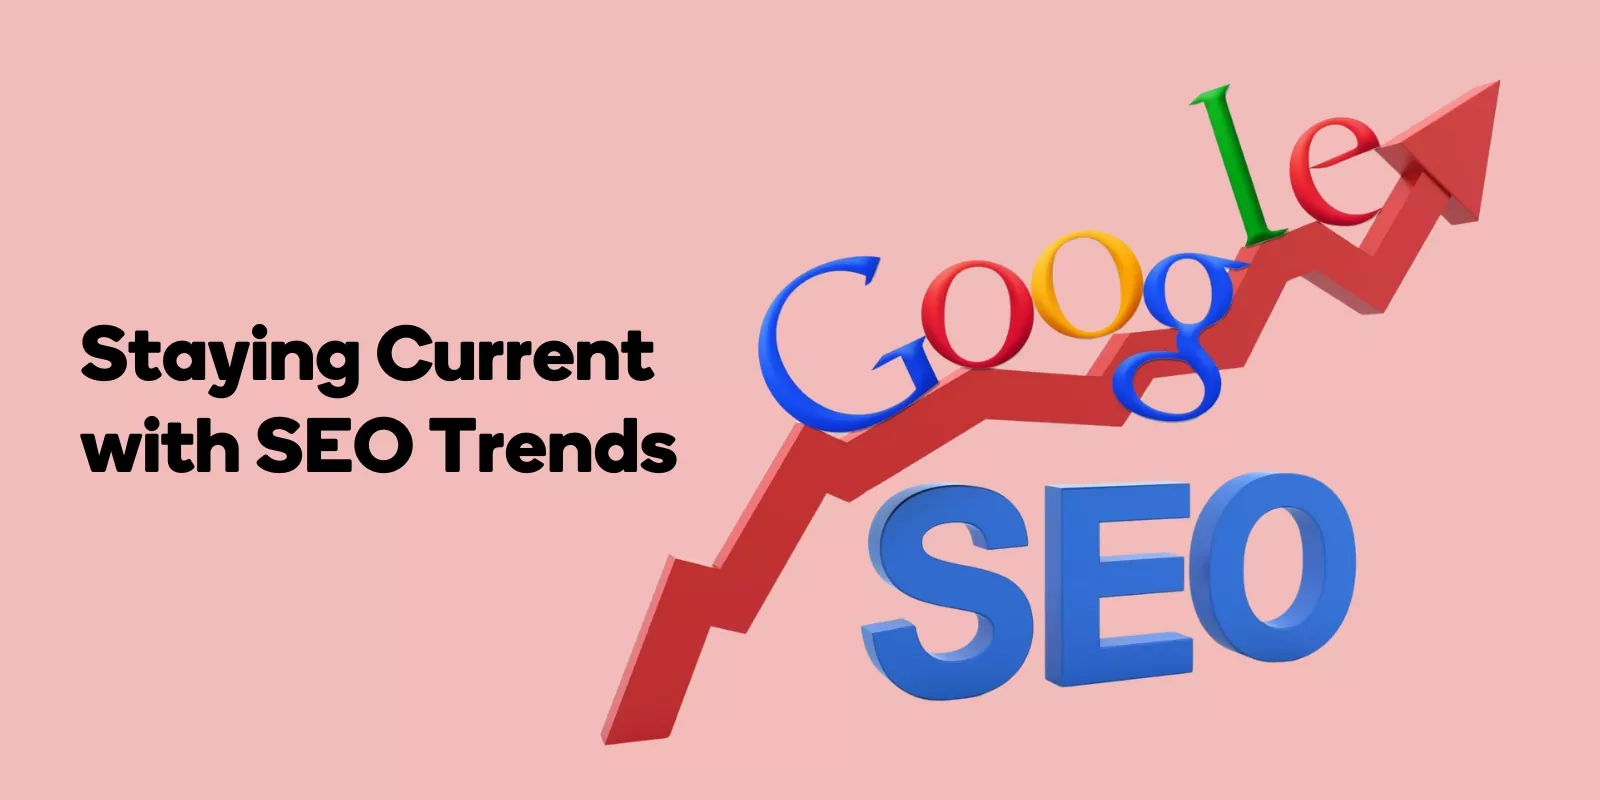 Staying Current with SEO Trends